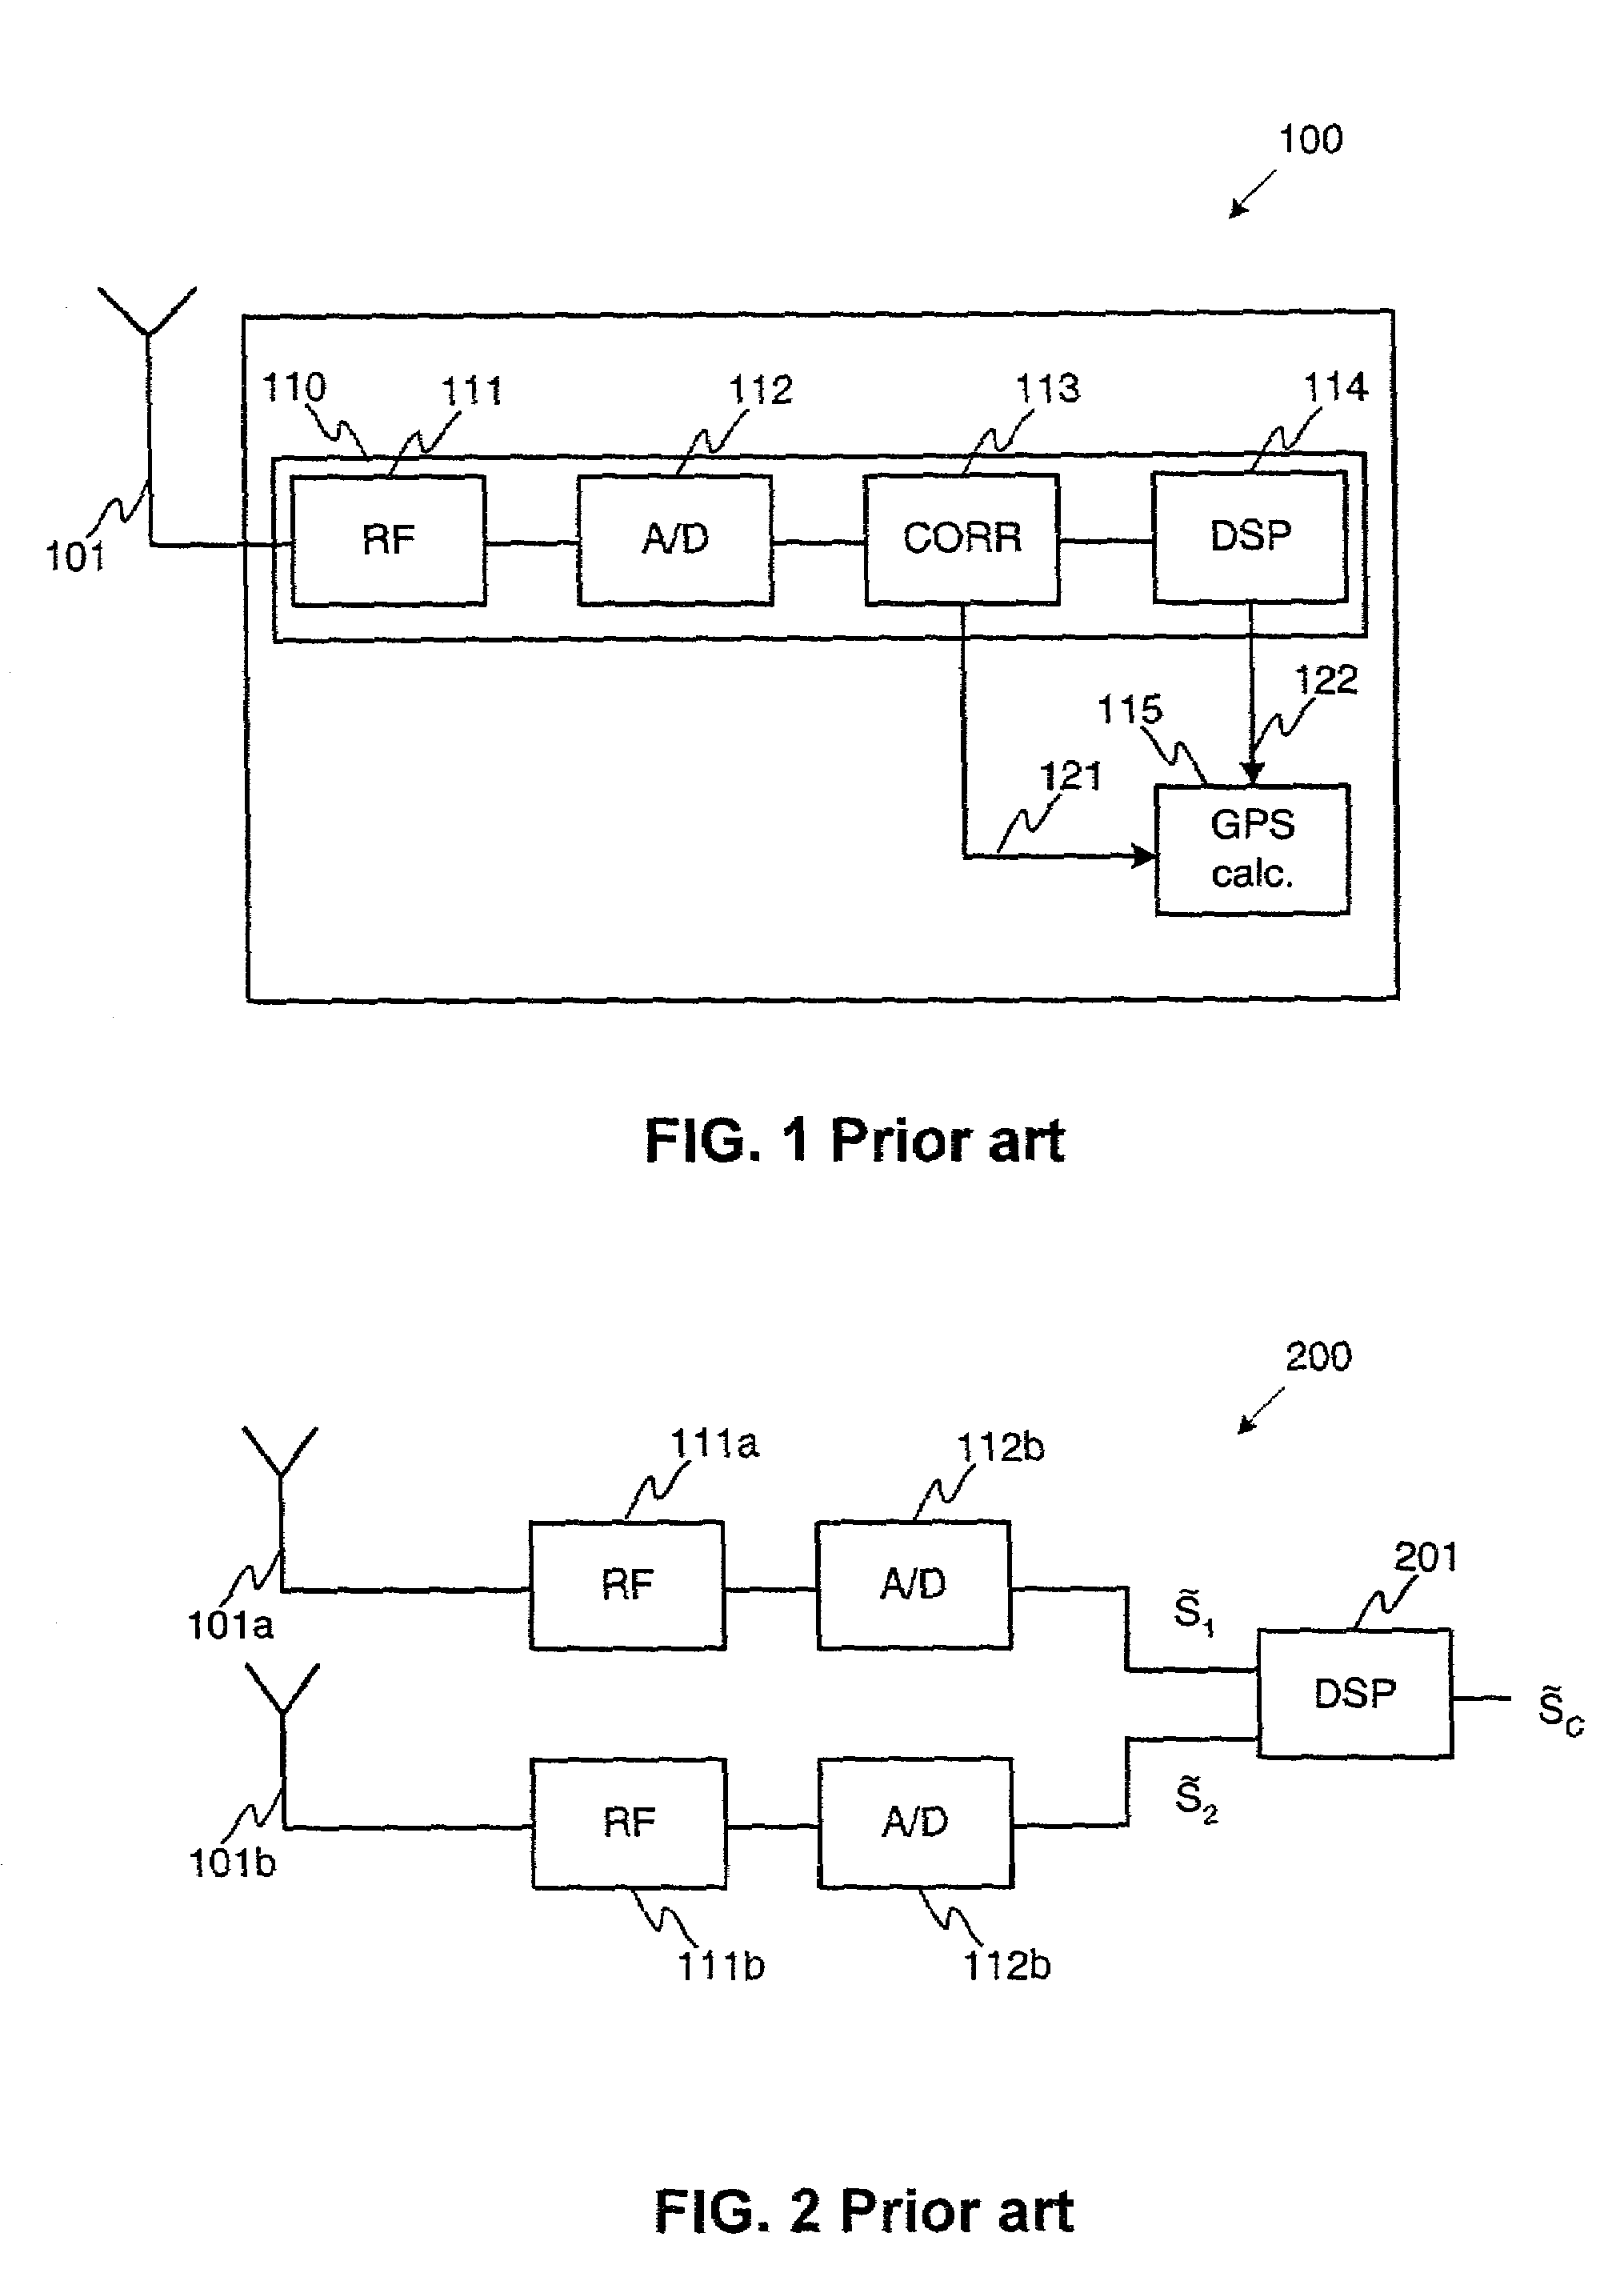 Method for receiving radio frequency signal and a receiver device